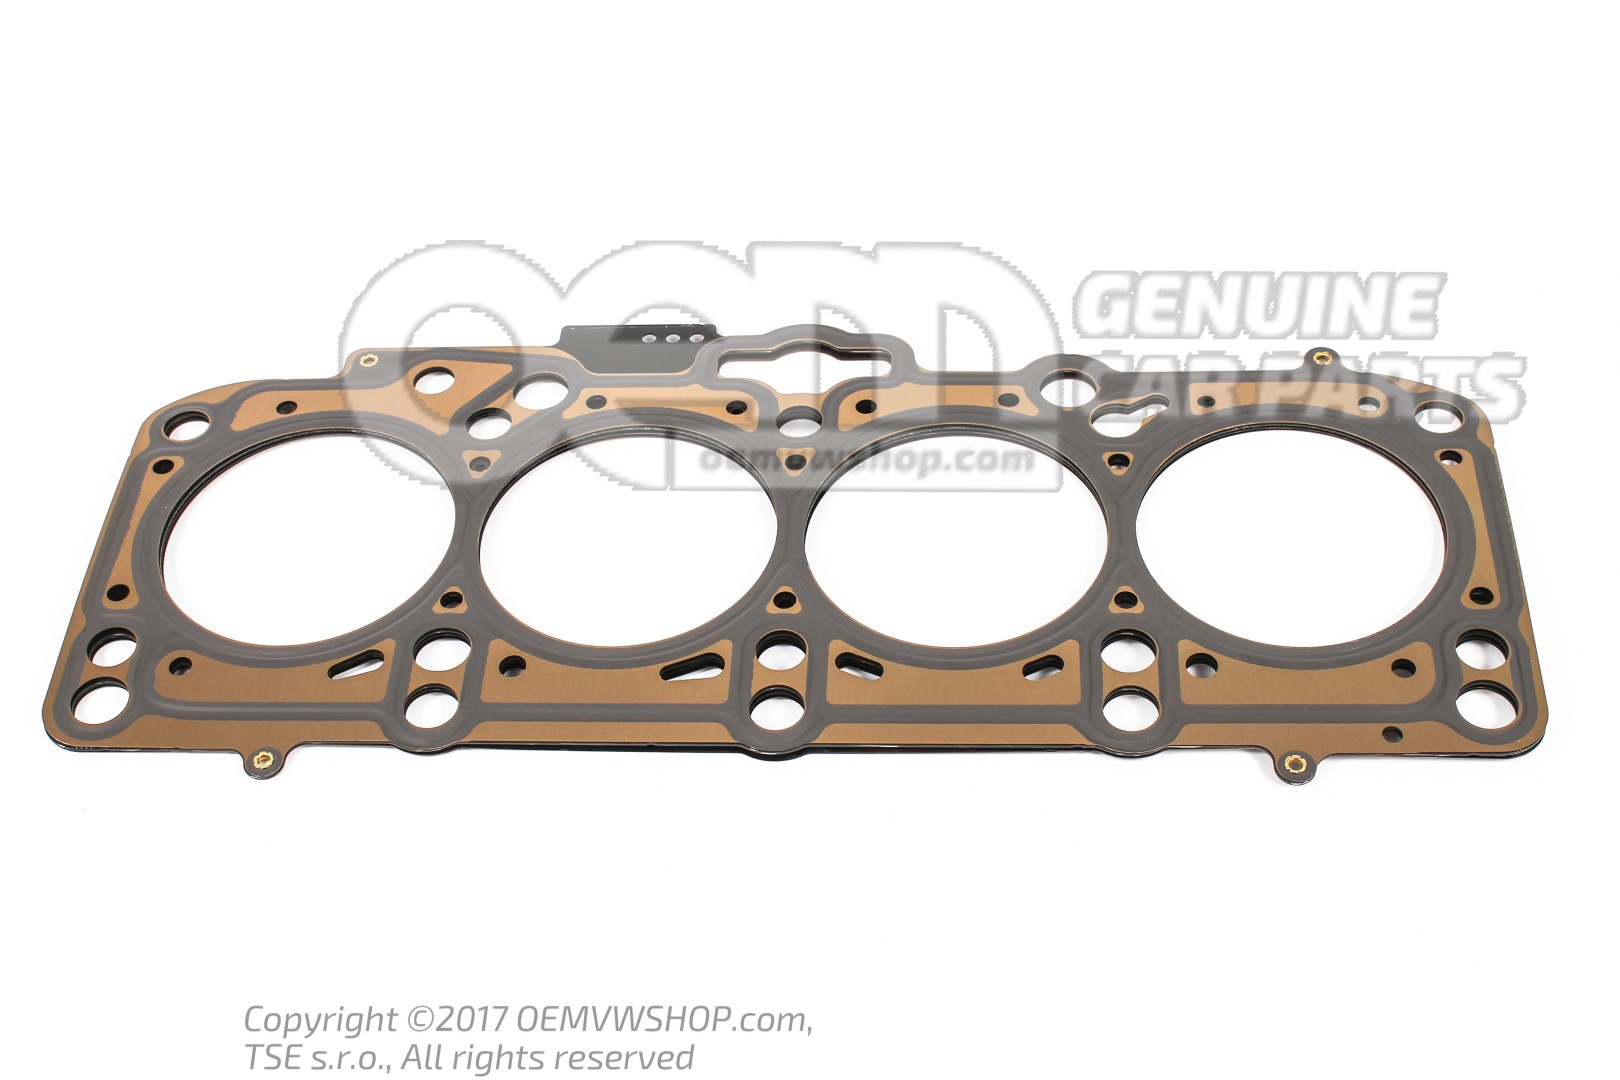 930-0088 thickness .032 in S&S Cycle Head Gaskets 3 7/16" and 3 1/2" bore